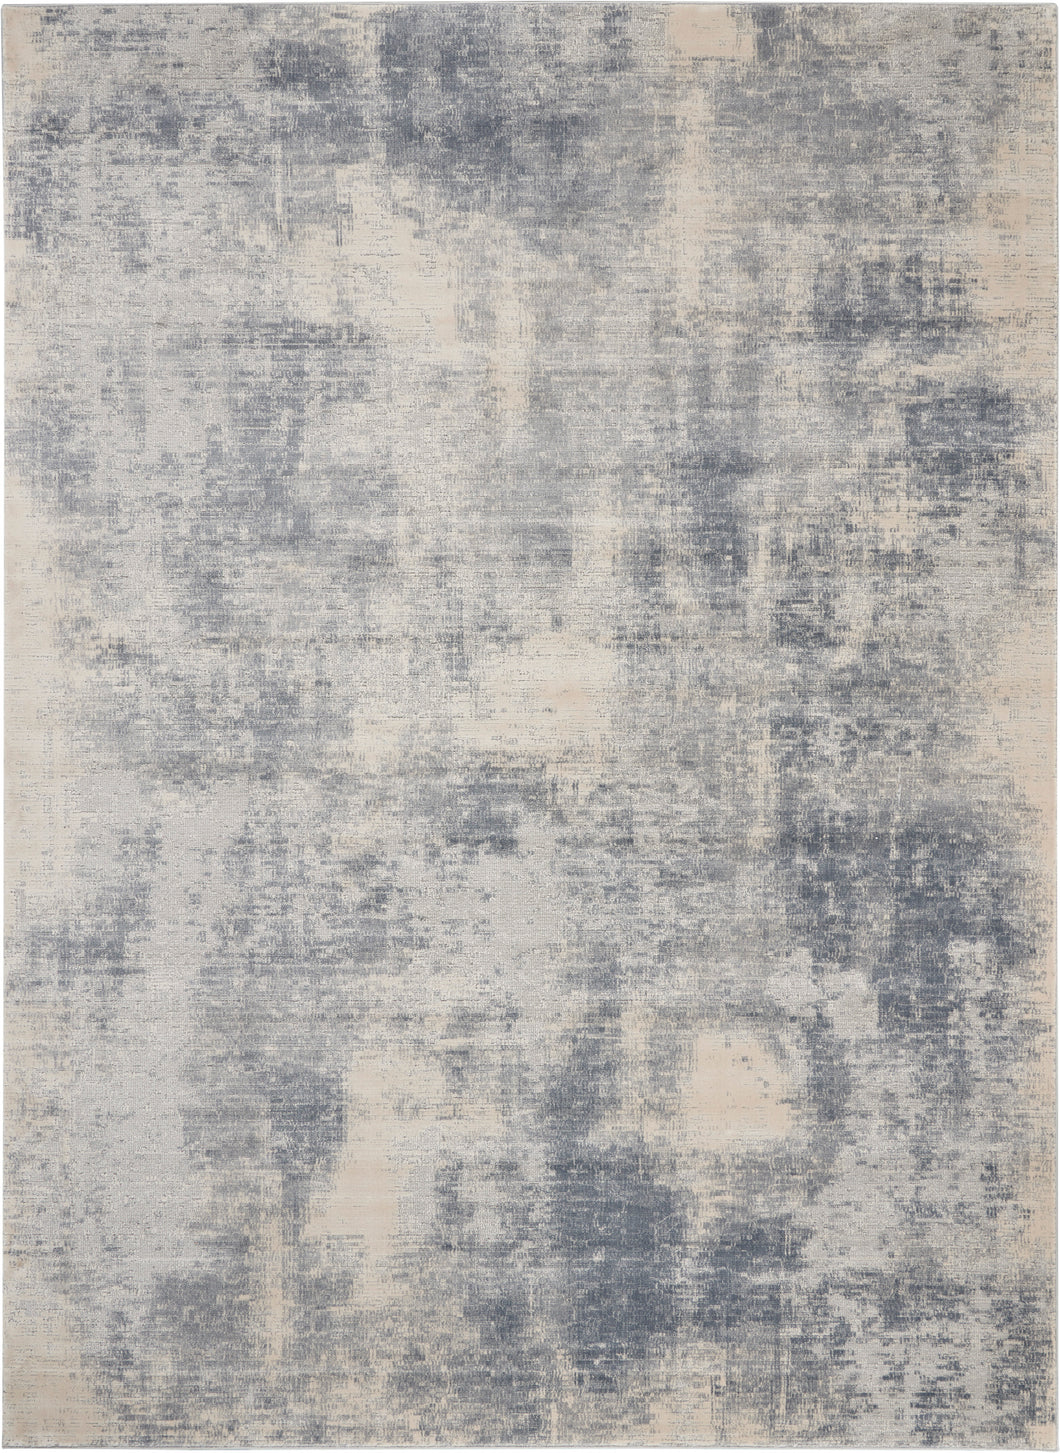 Nourison Rustic Textures RUS02 Slate Blue and Ivory 9'x13' Oversized Textured Rug RUS02 Blue/Ivory